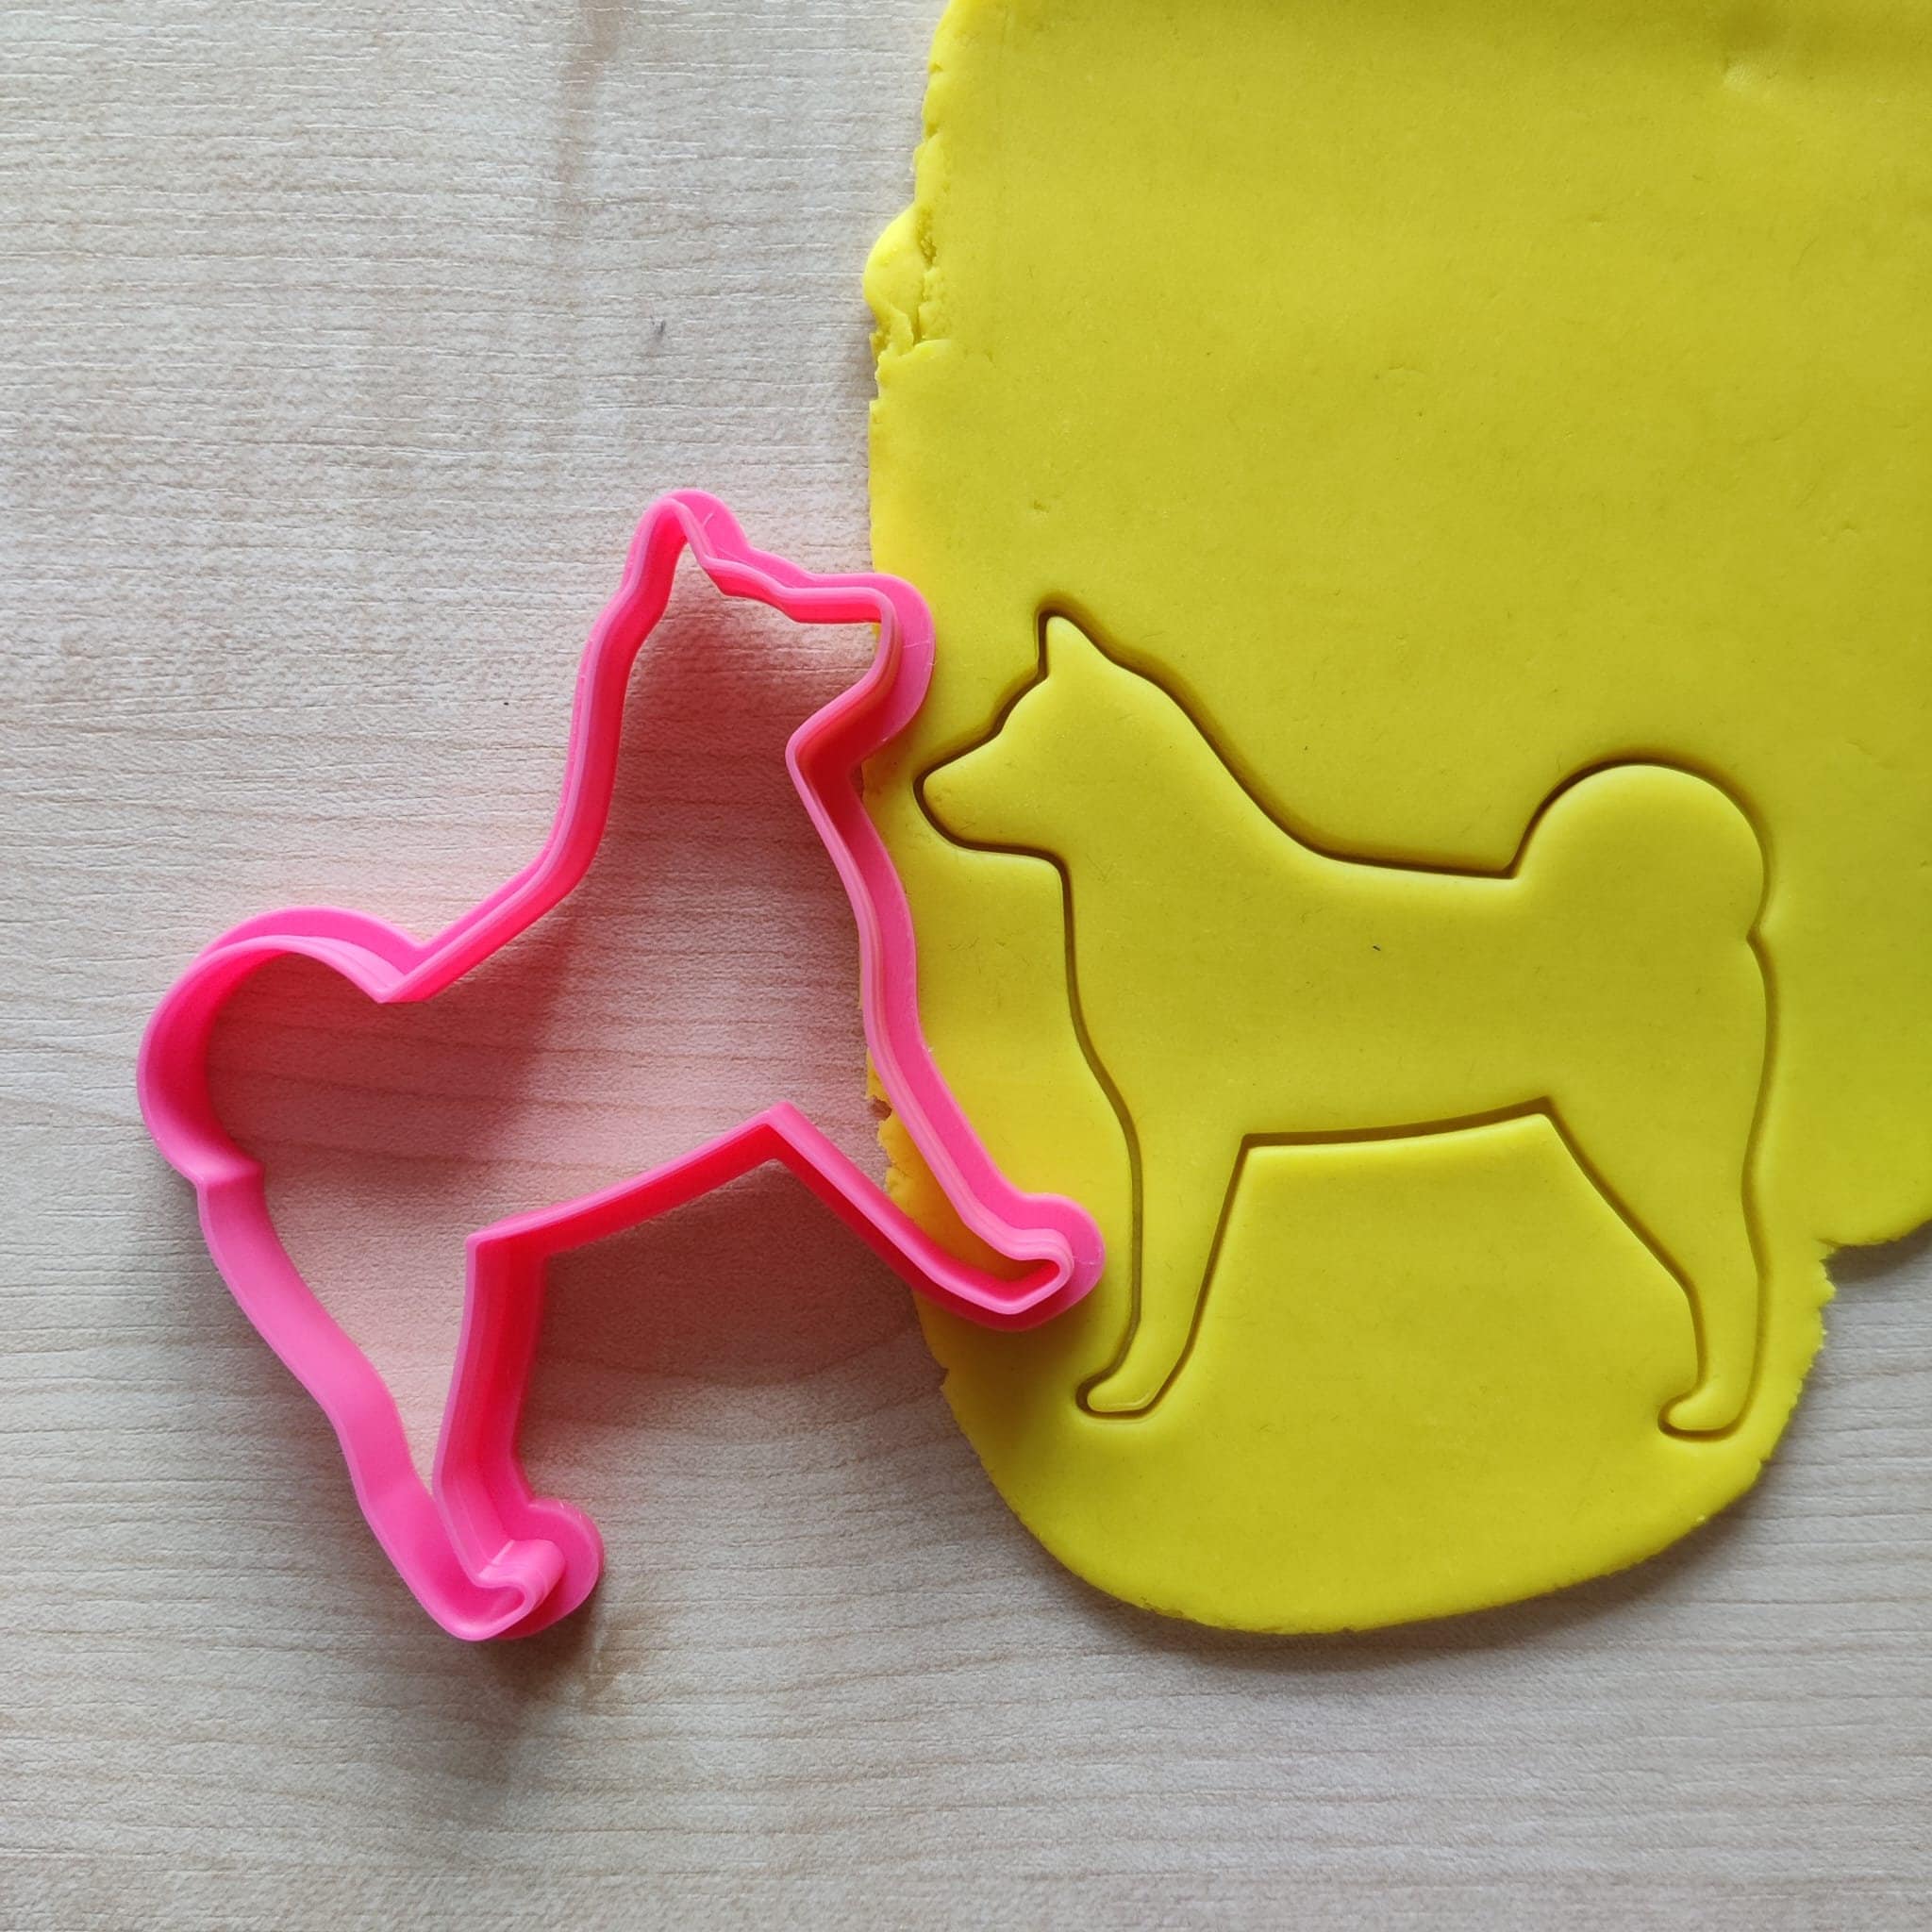 Akita Inu Face cookie cutter, biscuit fondant clay Japanese loyal dog  treats kennel canine Veterinary adoption drive vet gift, Fondant Cutter, Clay Cutter